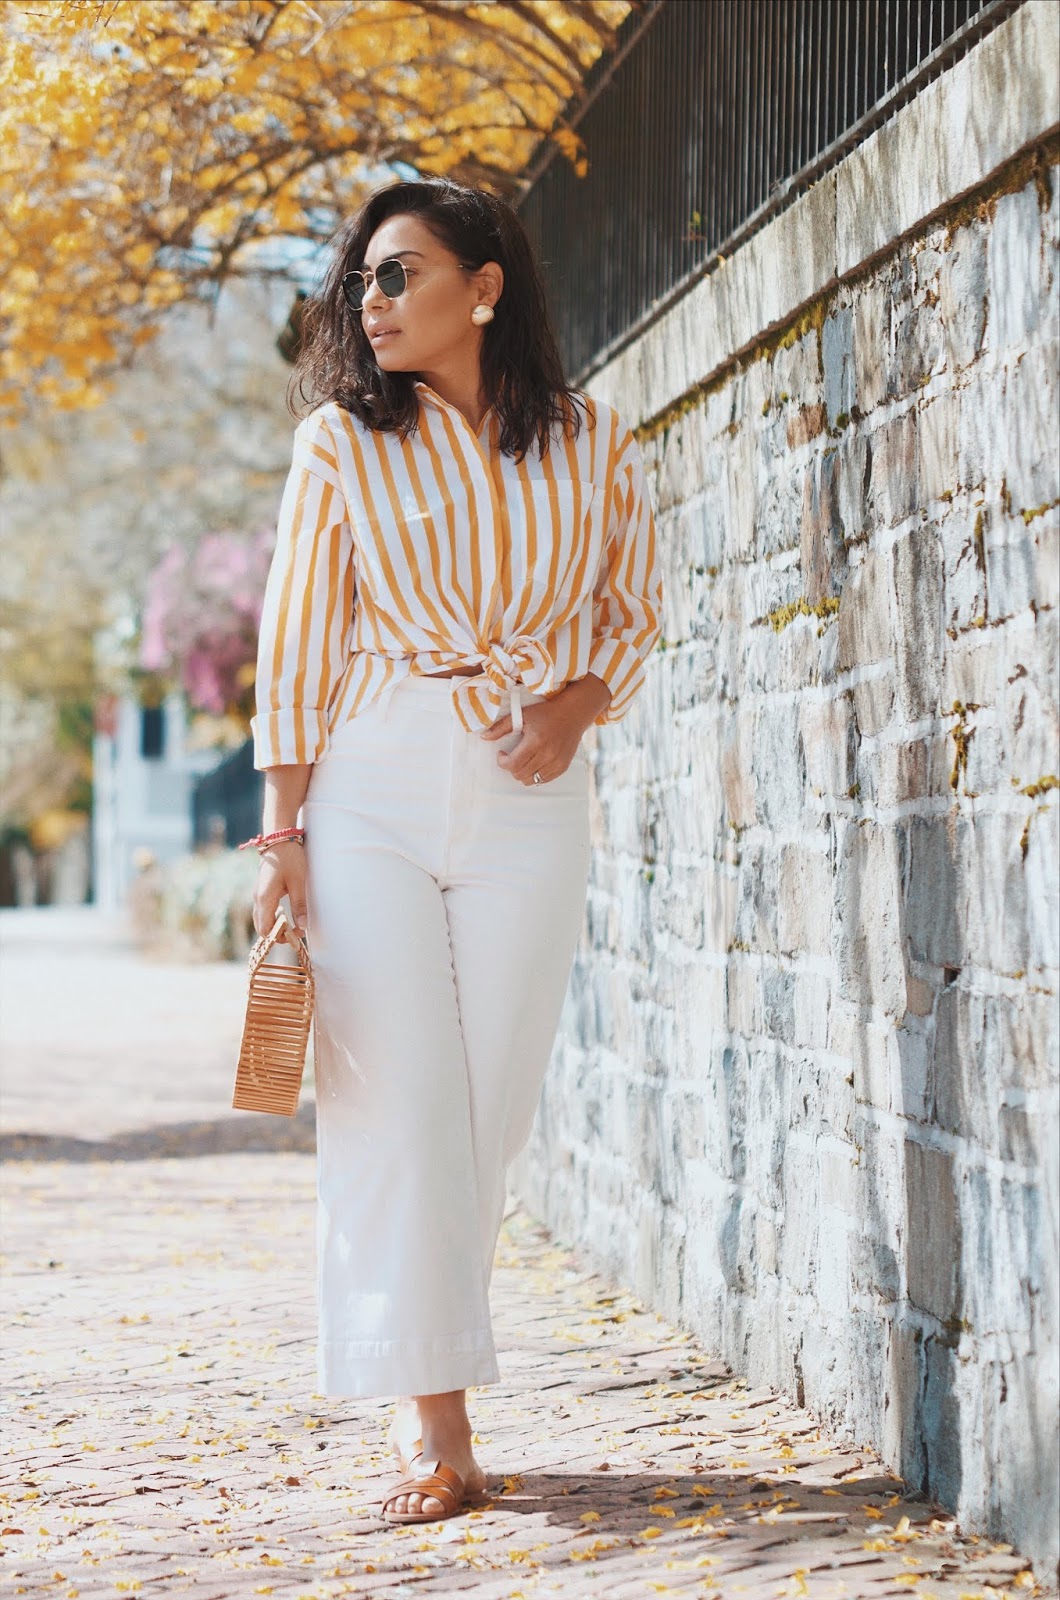 Casual Spring Outfit Idea | The Style Brunch